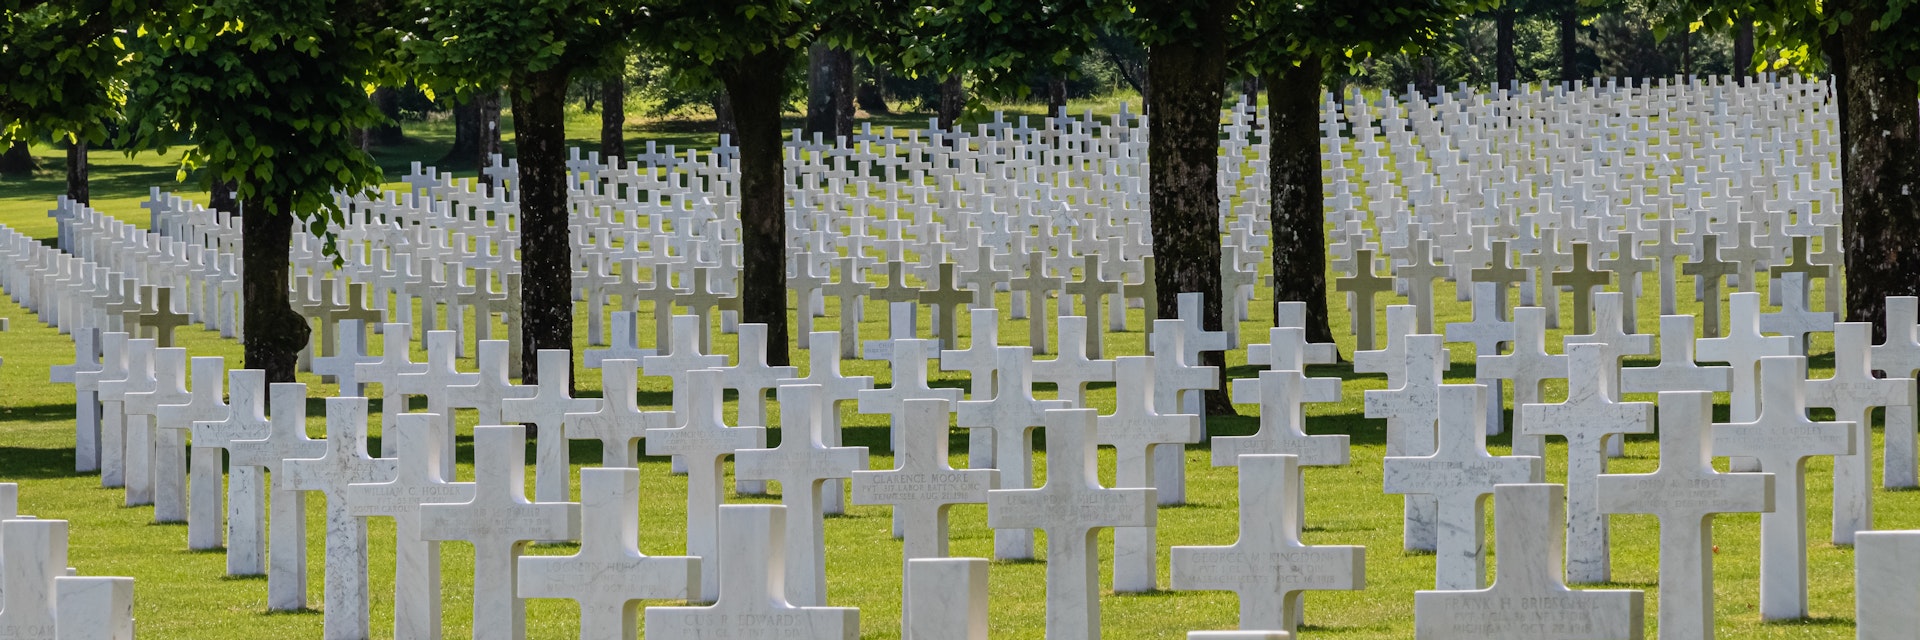 American Cemetery in Romagne-sous-Montfaucon, where 14,246 Americans are buried.